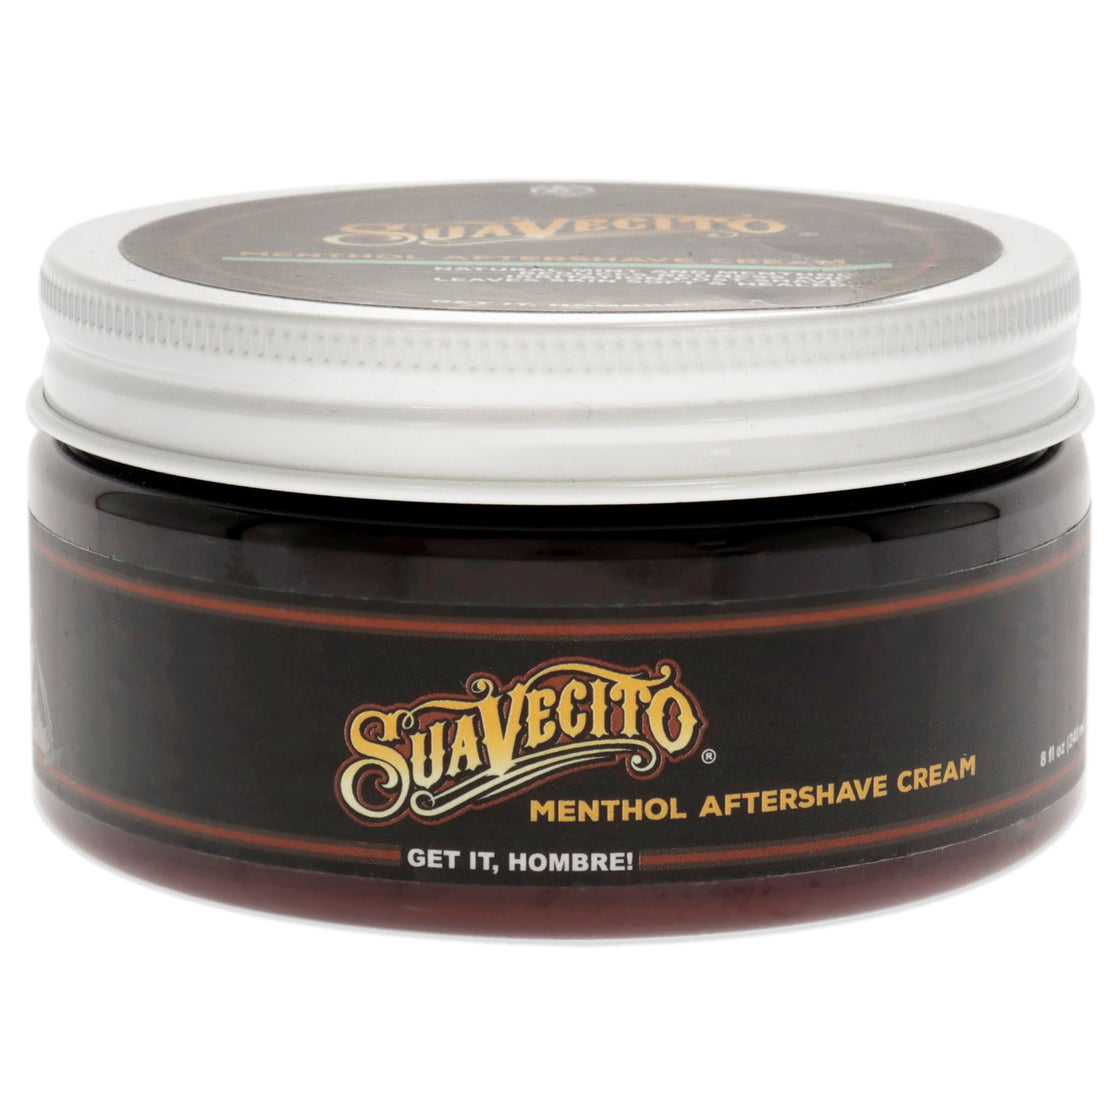 Mentol Aftershave Cream by Suavecito for Men 8 oz After Shave